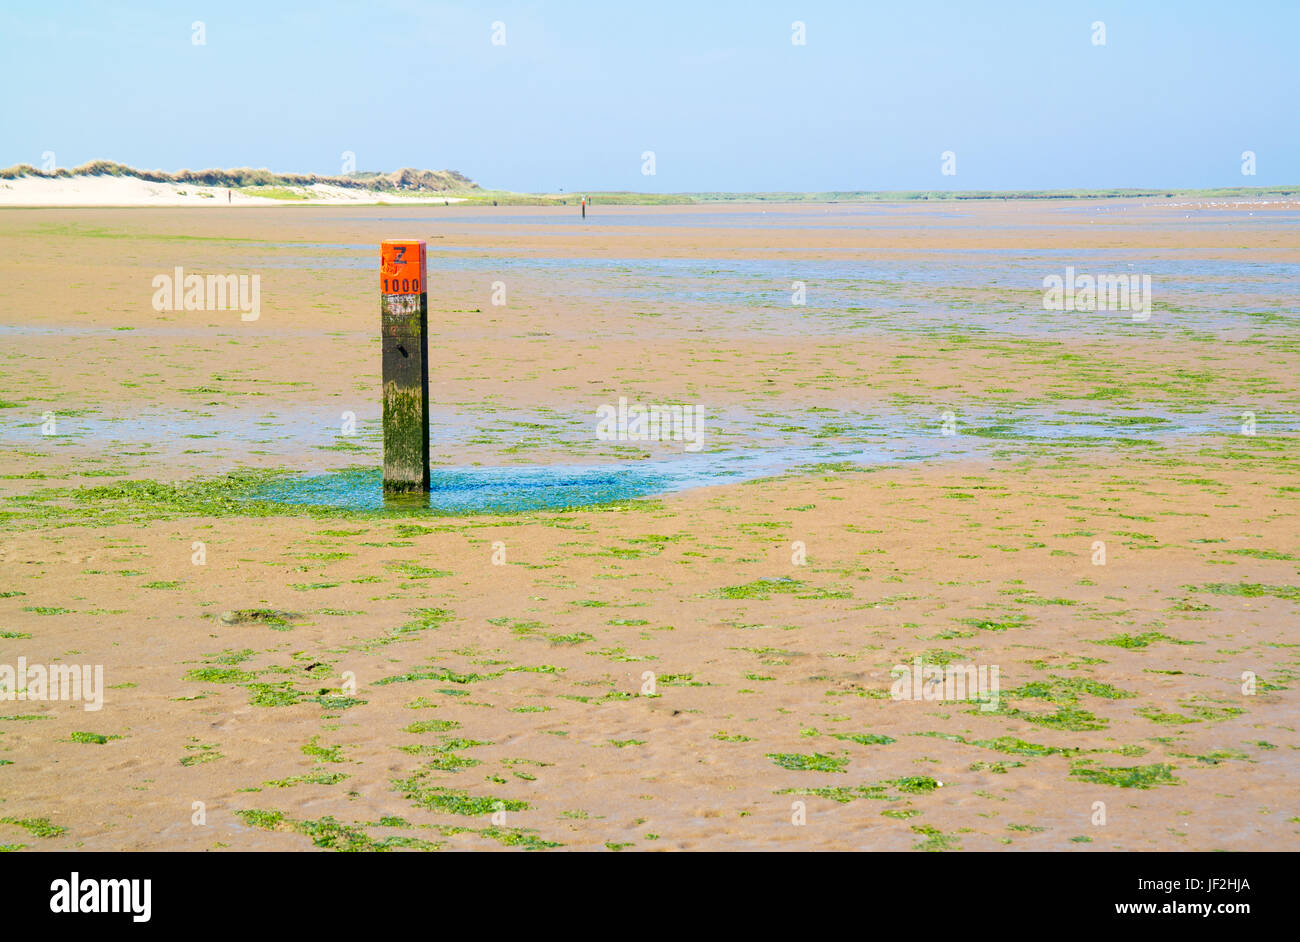 Beach pole with red top, distance marker for basic coastline indicating tide line of North Sea, Goeree, South Holland, Netherlands Stock Photo